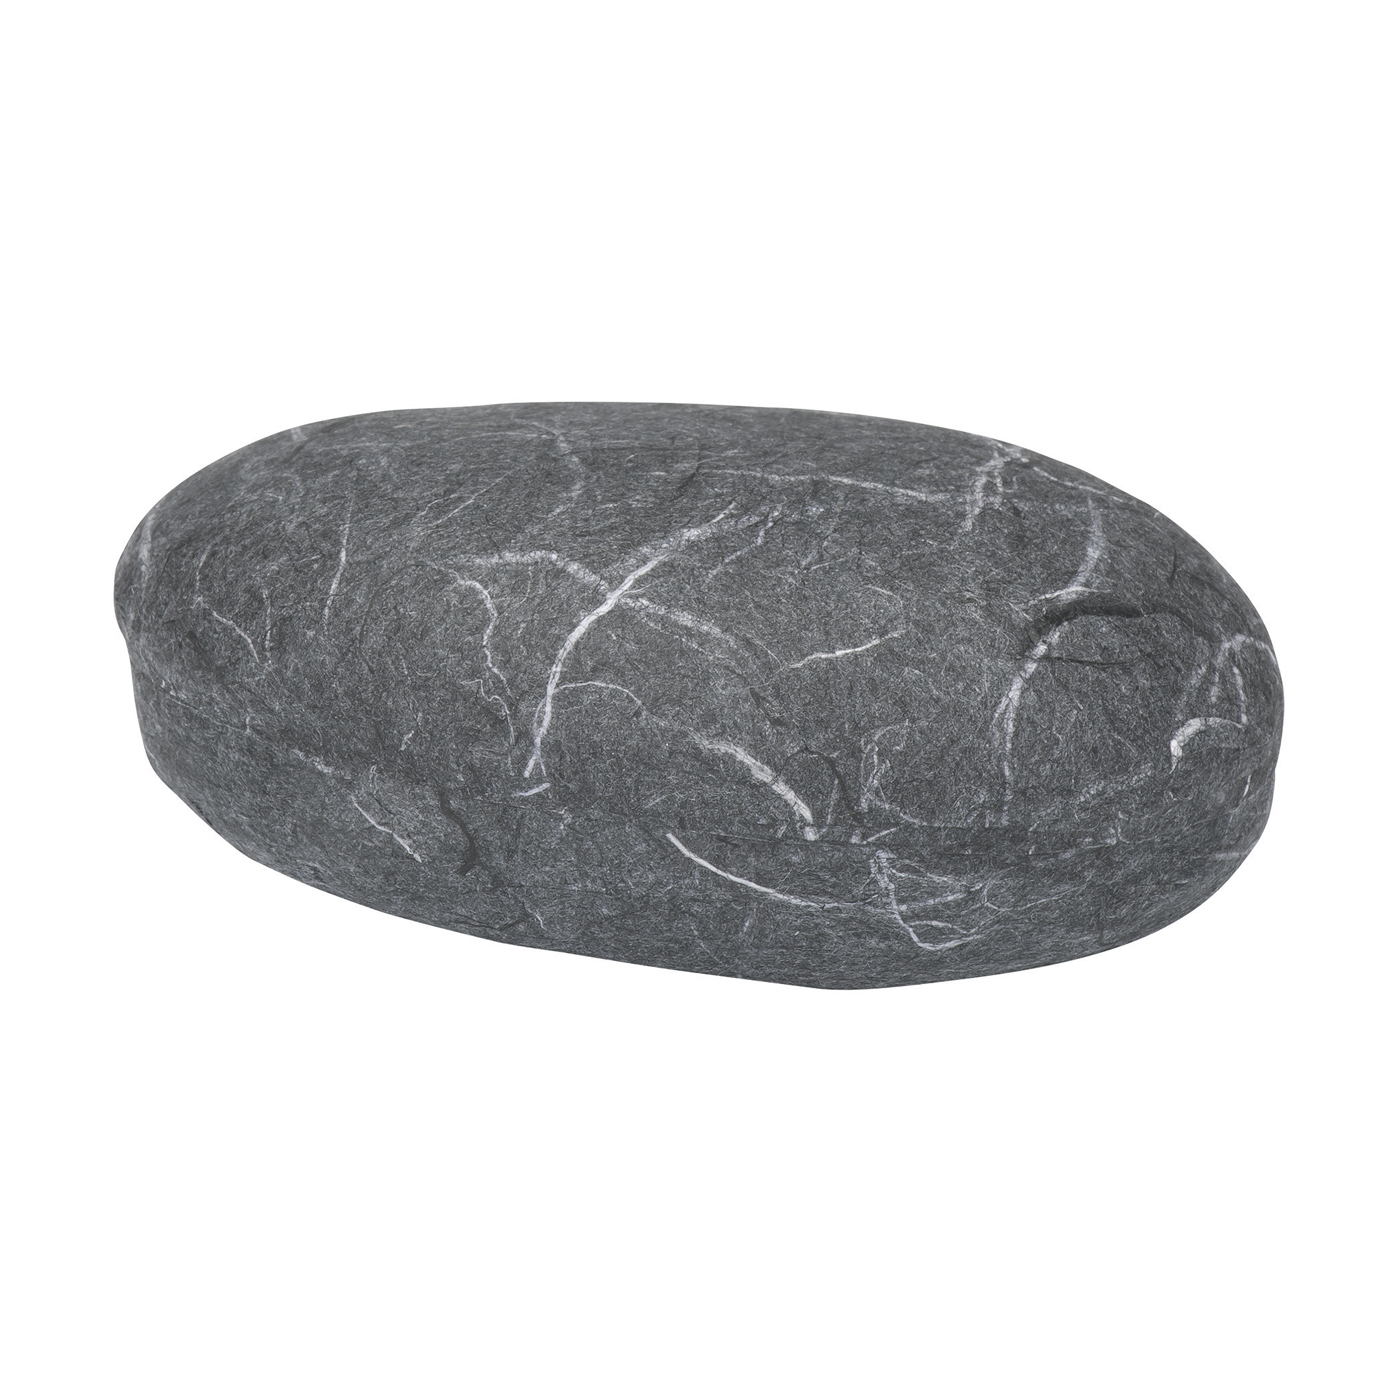 Jewellery Packaging "Stone", Anthracite Mottled, 90x60x35 mm - 1 piece